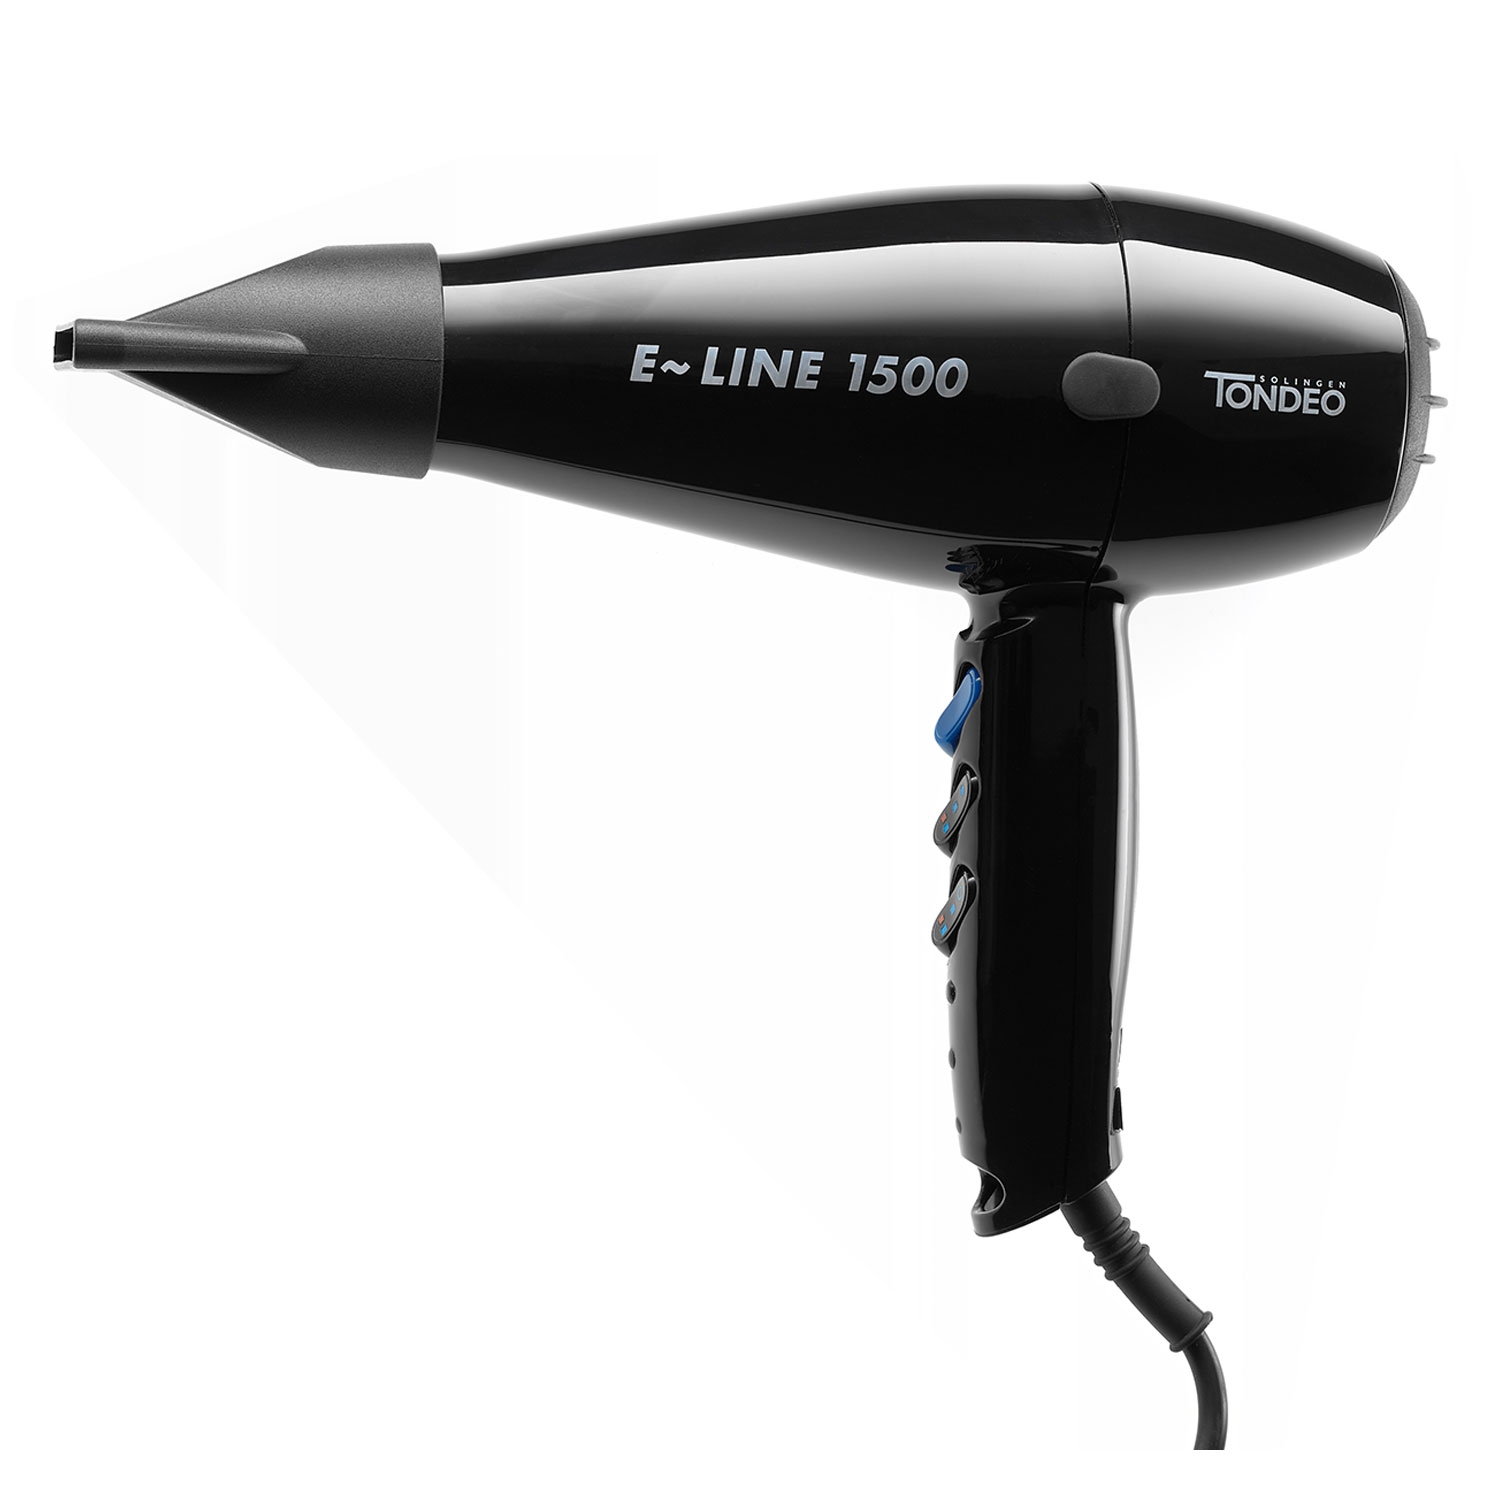 Product image from Tondeo Hot Tools - Tondeo Hairdryer E-Line 1500 Black